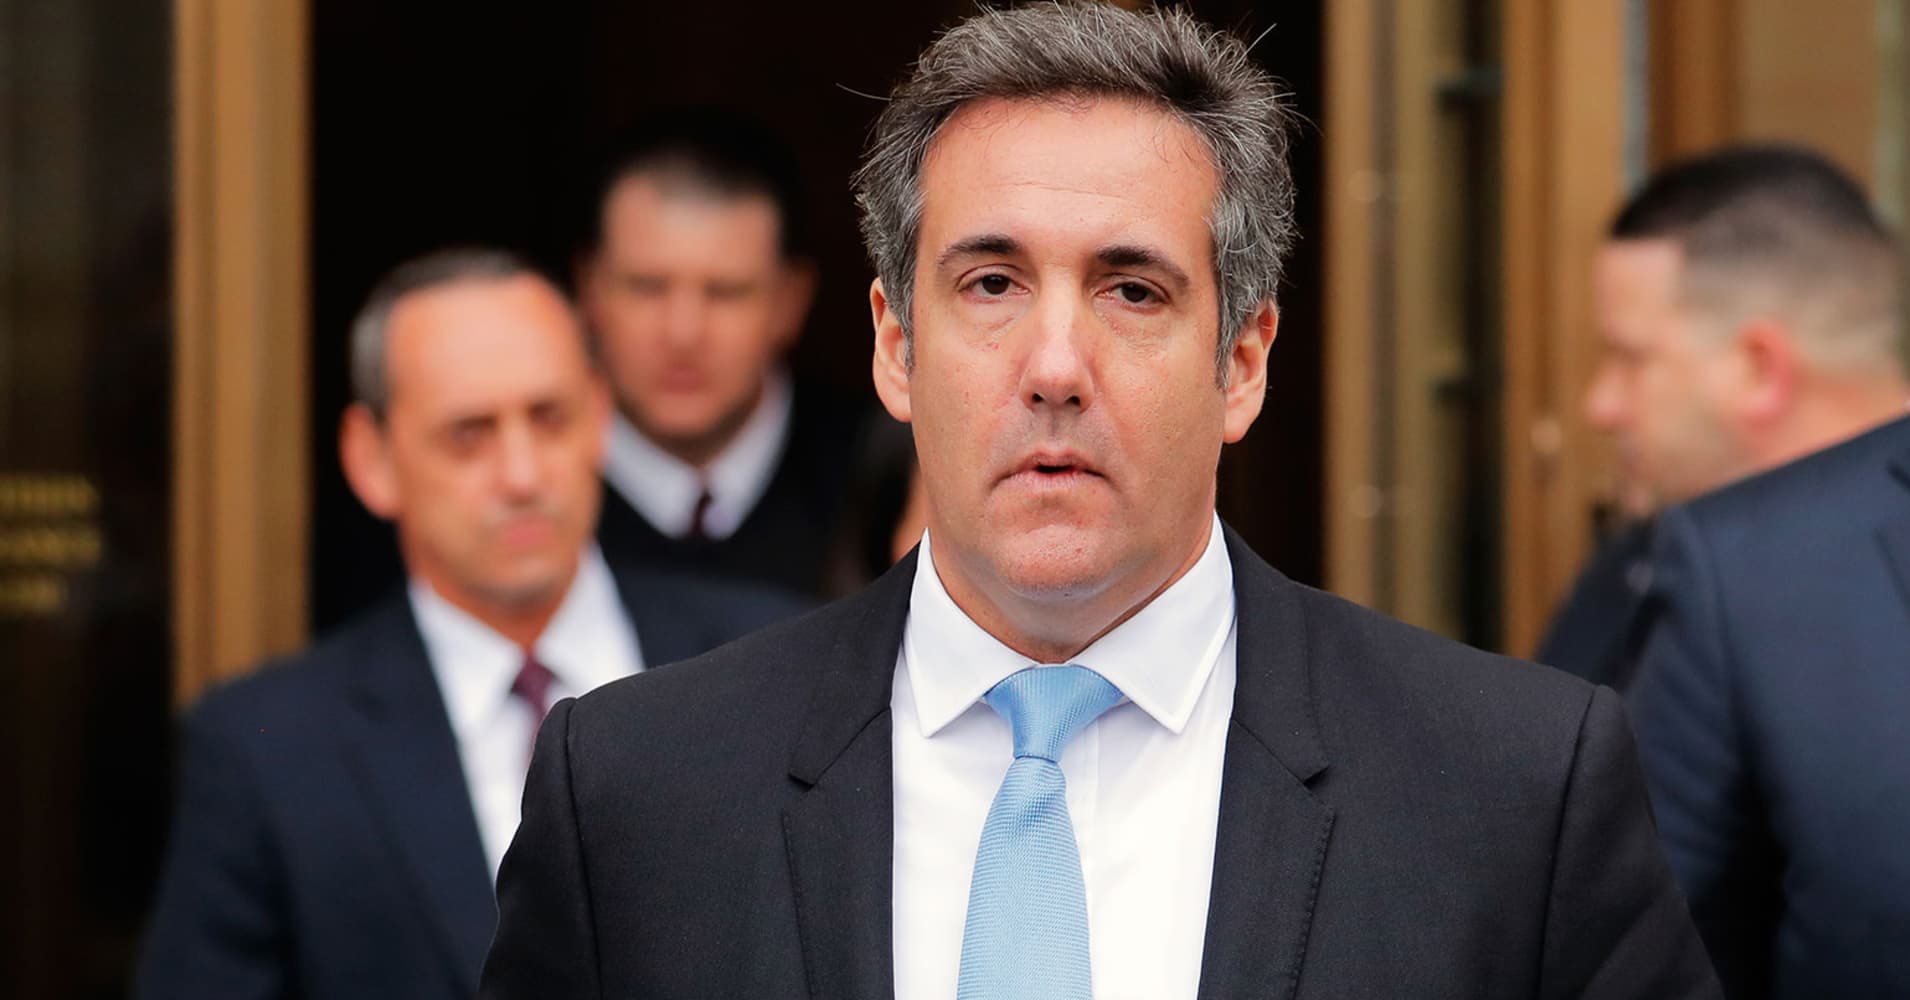 Federal prosecutors in New York call for 'substantial term' in prison for Michael Cohen